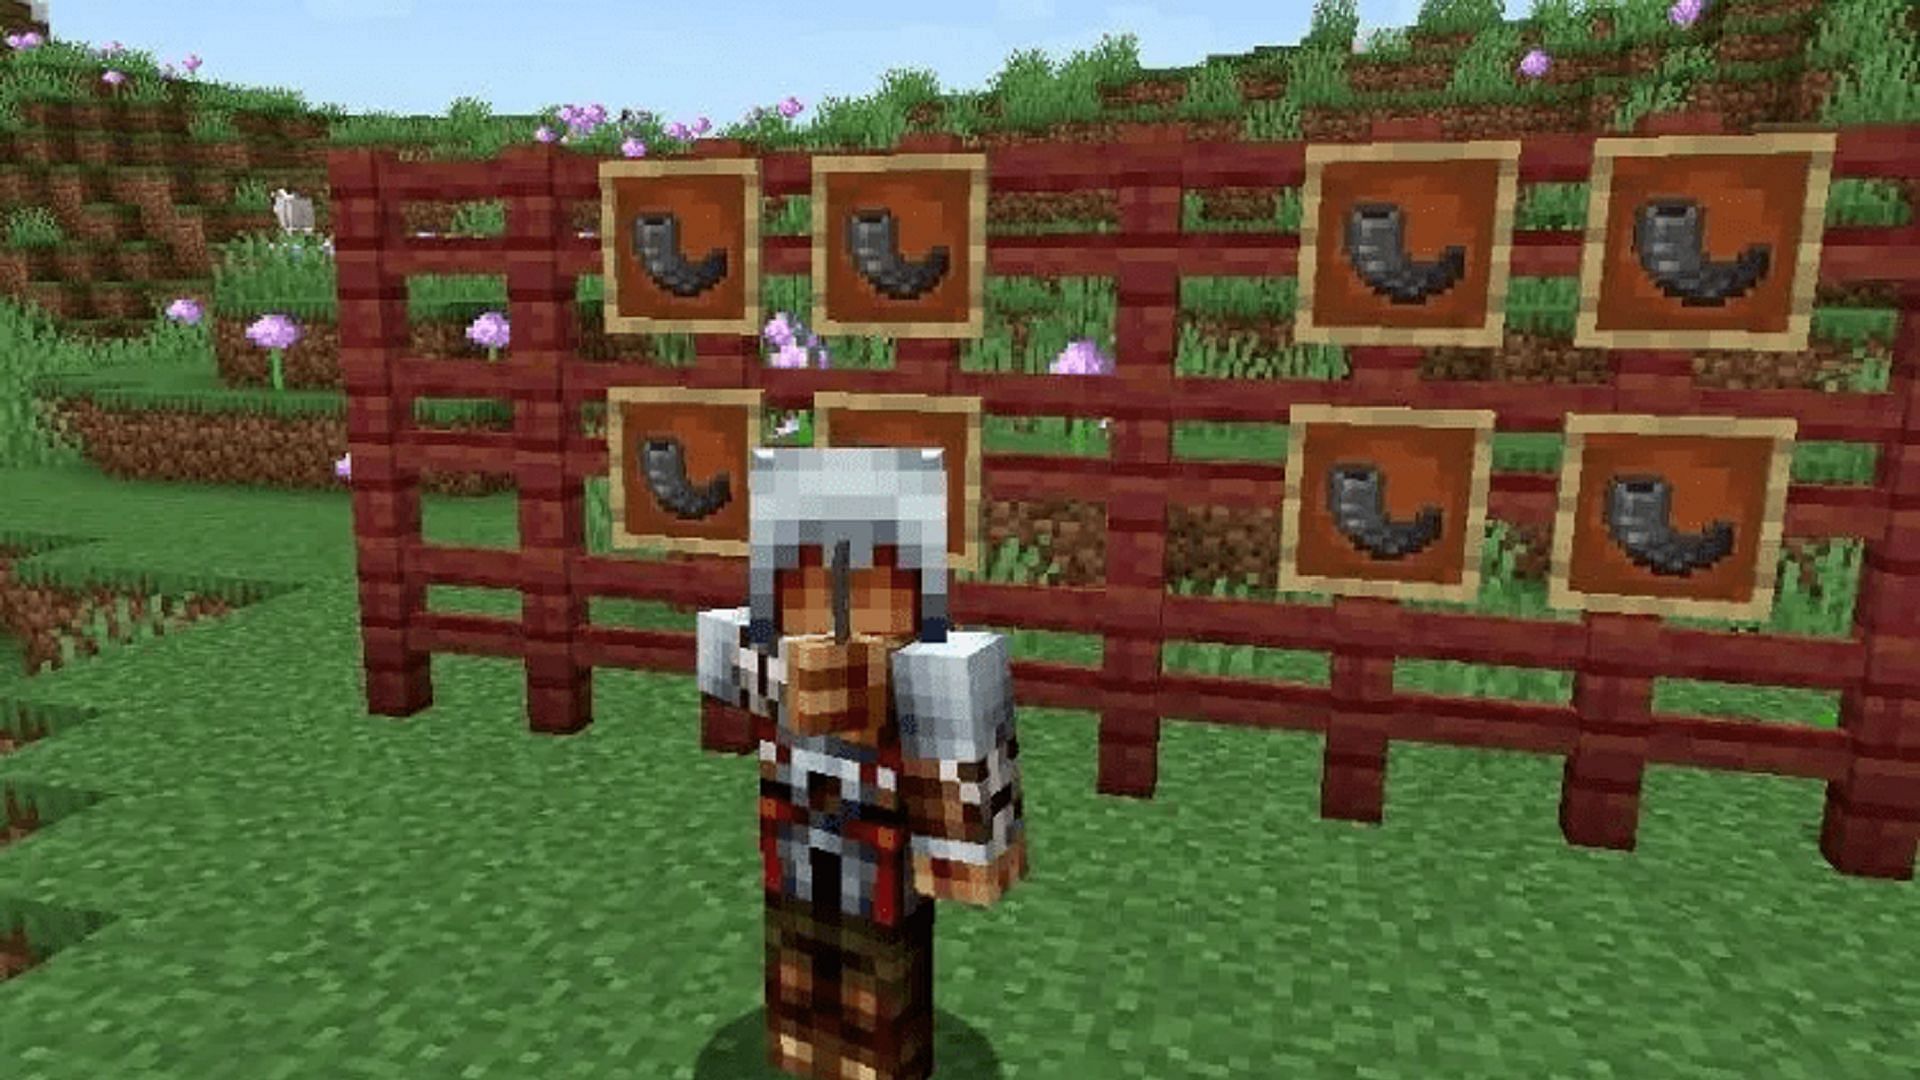 Goat horns fit nicely in addition to making sounds (Image via Mojang)